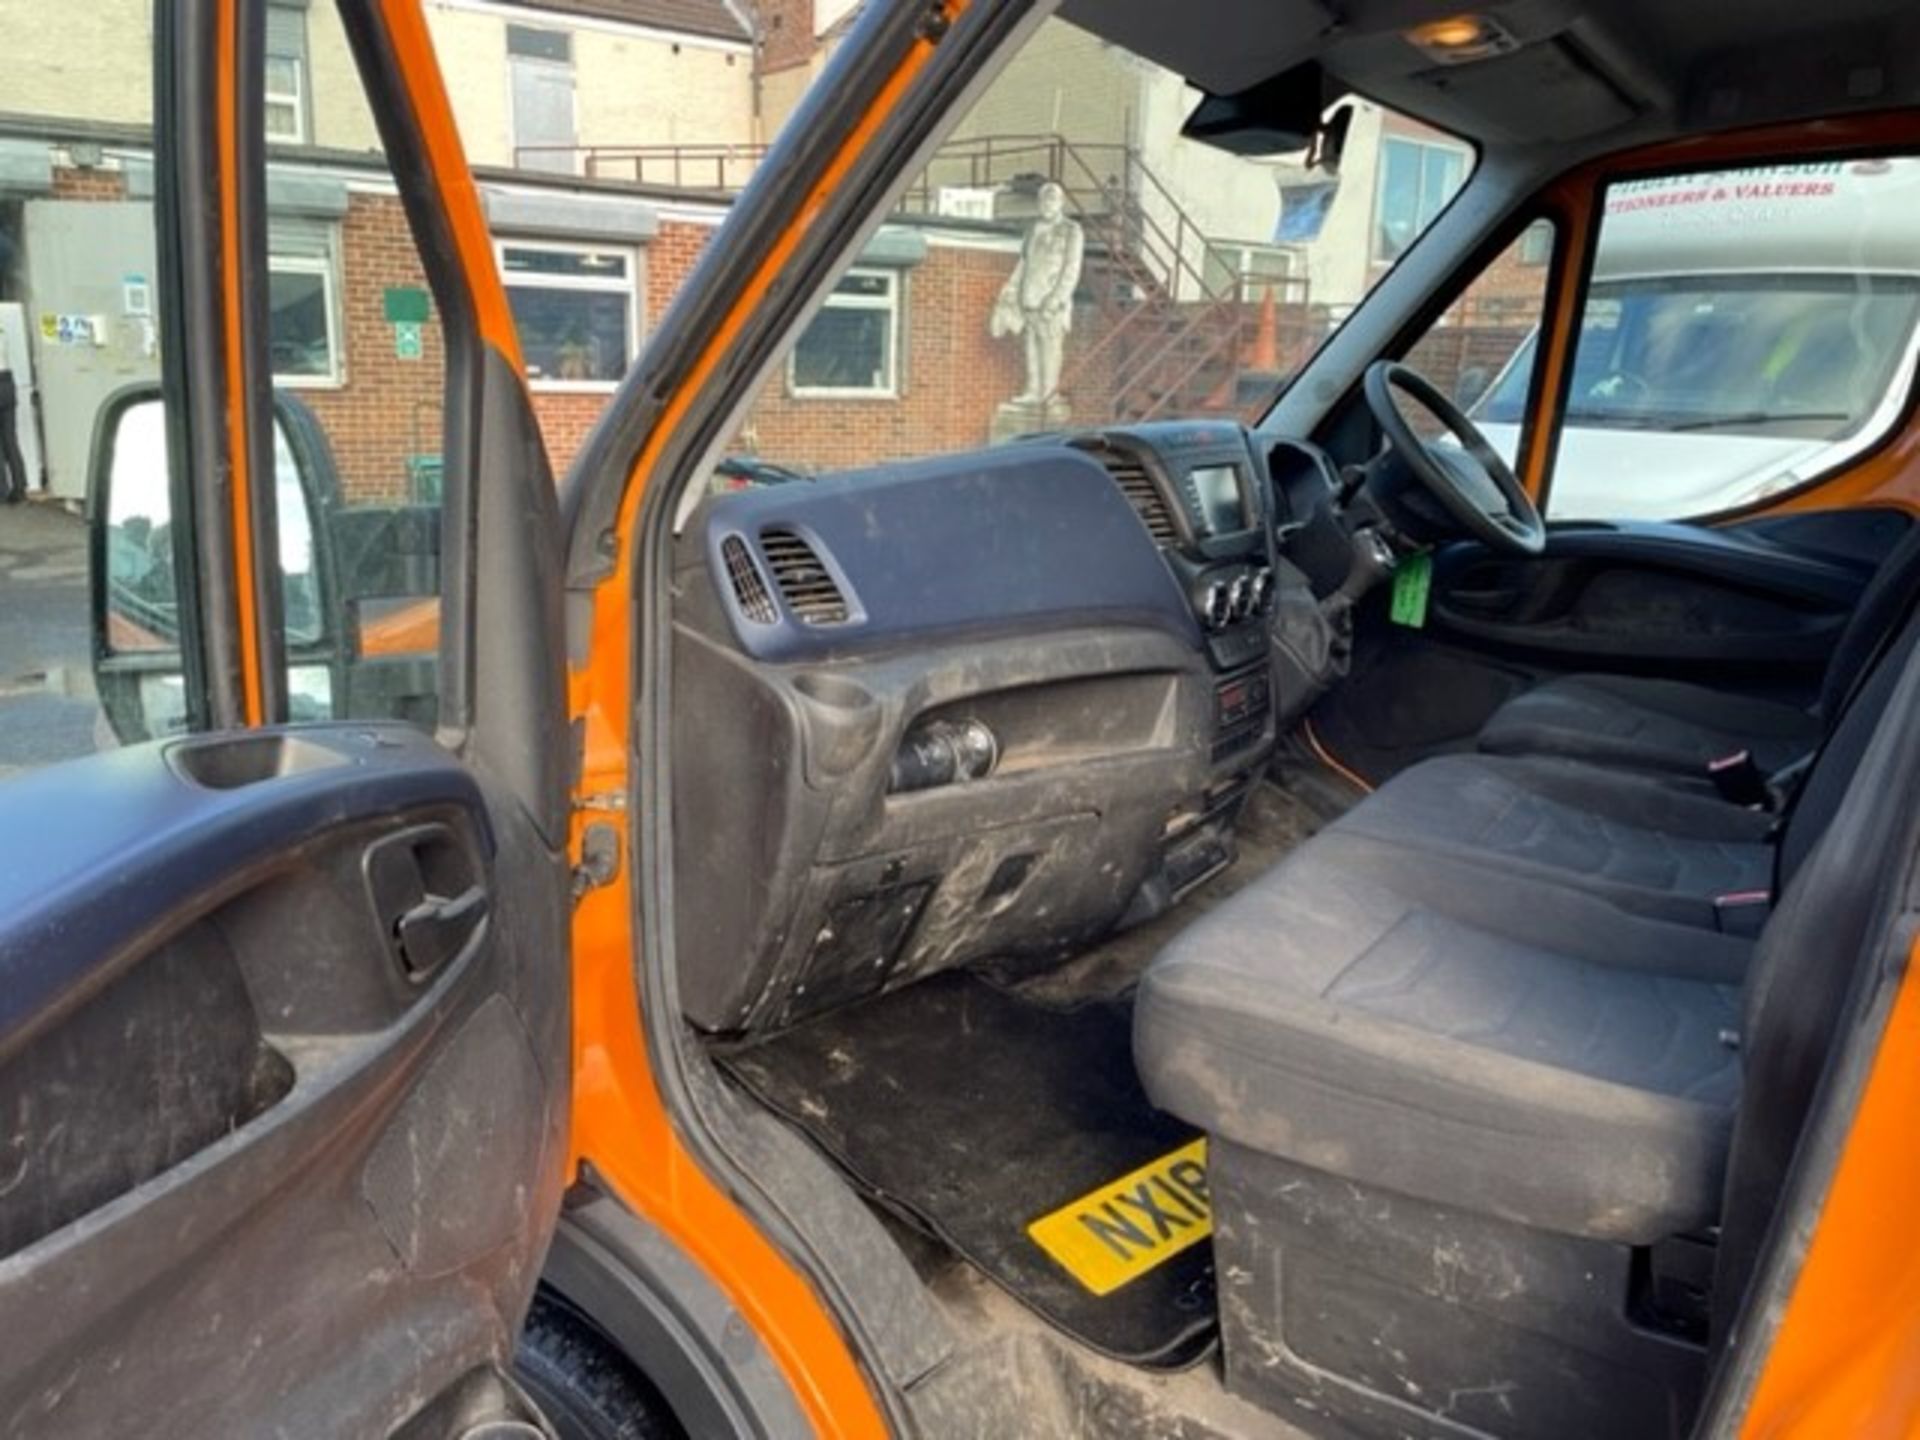 *Iveco Daily 5ton 180 Auto Tipper, Reg: NX18 OMA, 3810 engine hours, Mileage 126,911 - Image 5 of 10